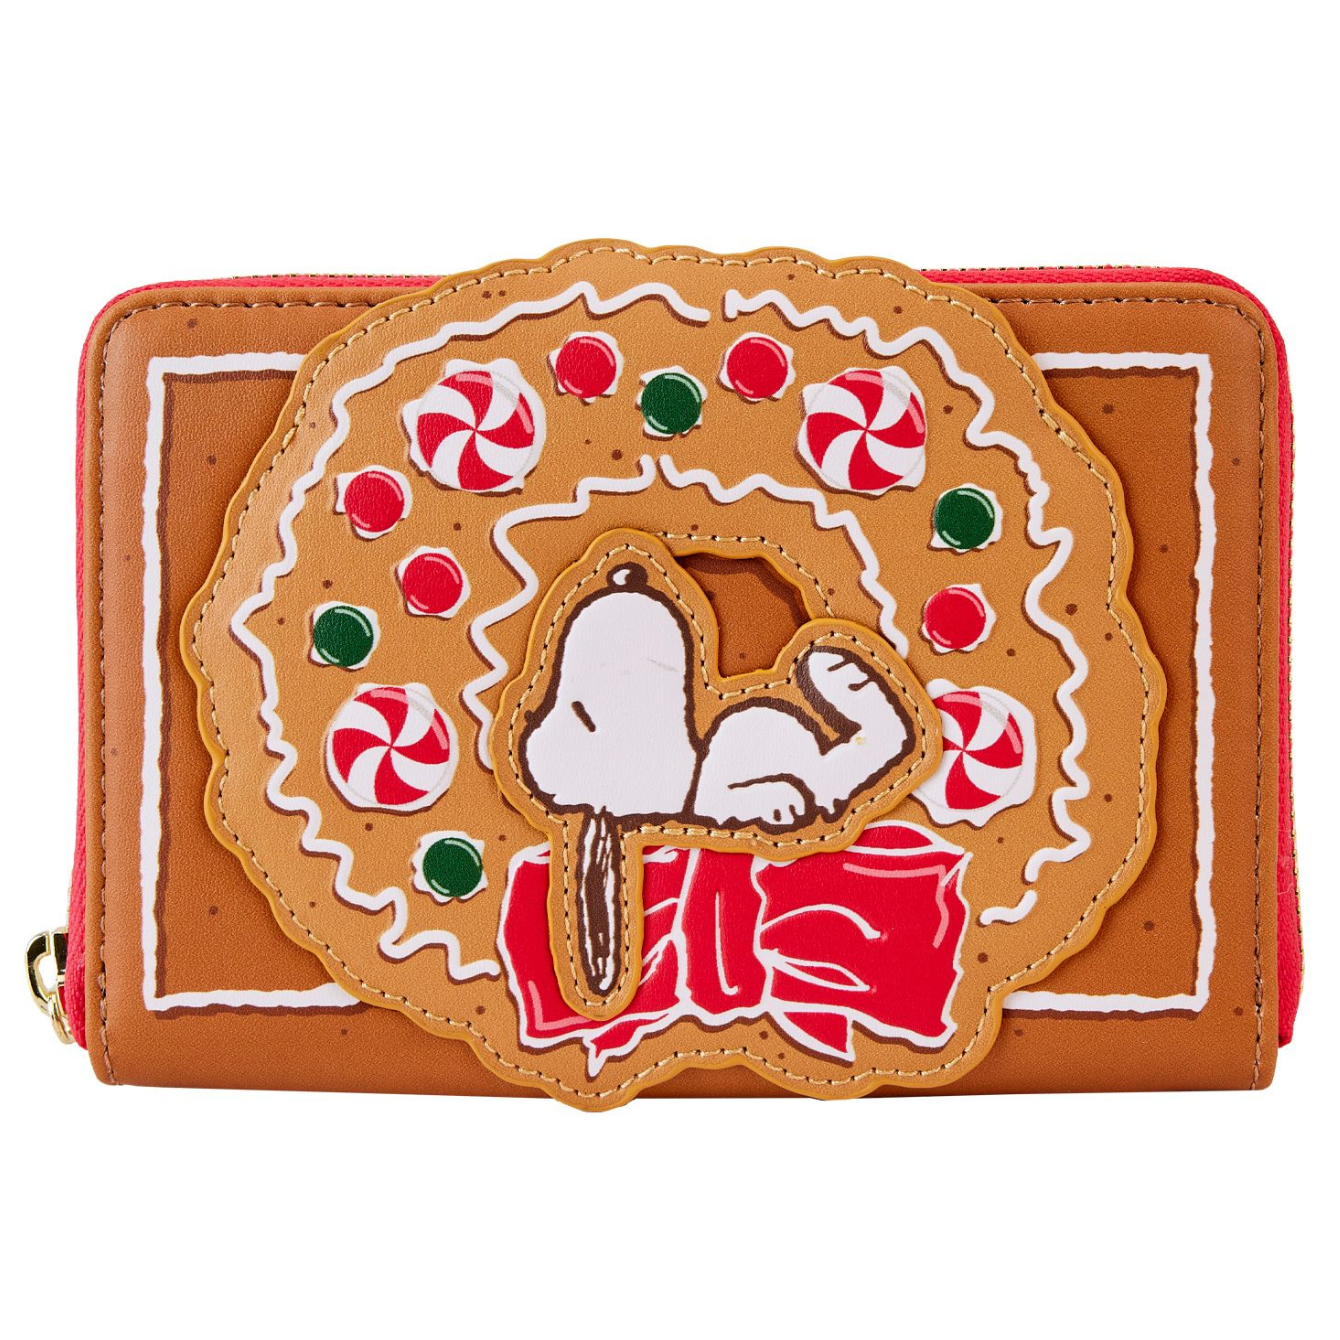 PRE-ORDER Loungefly Peanuts Snoopy Gingerbread House Wreath Wallet